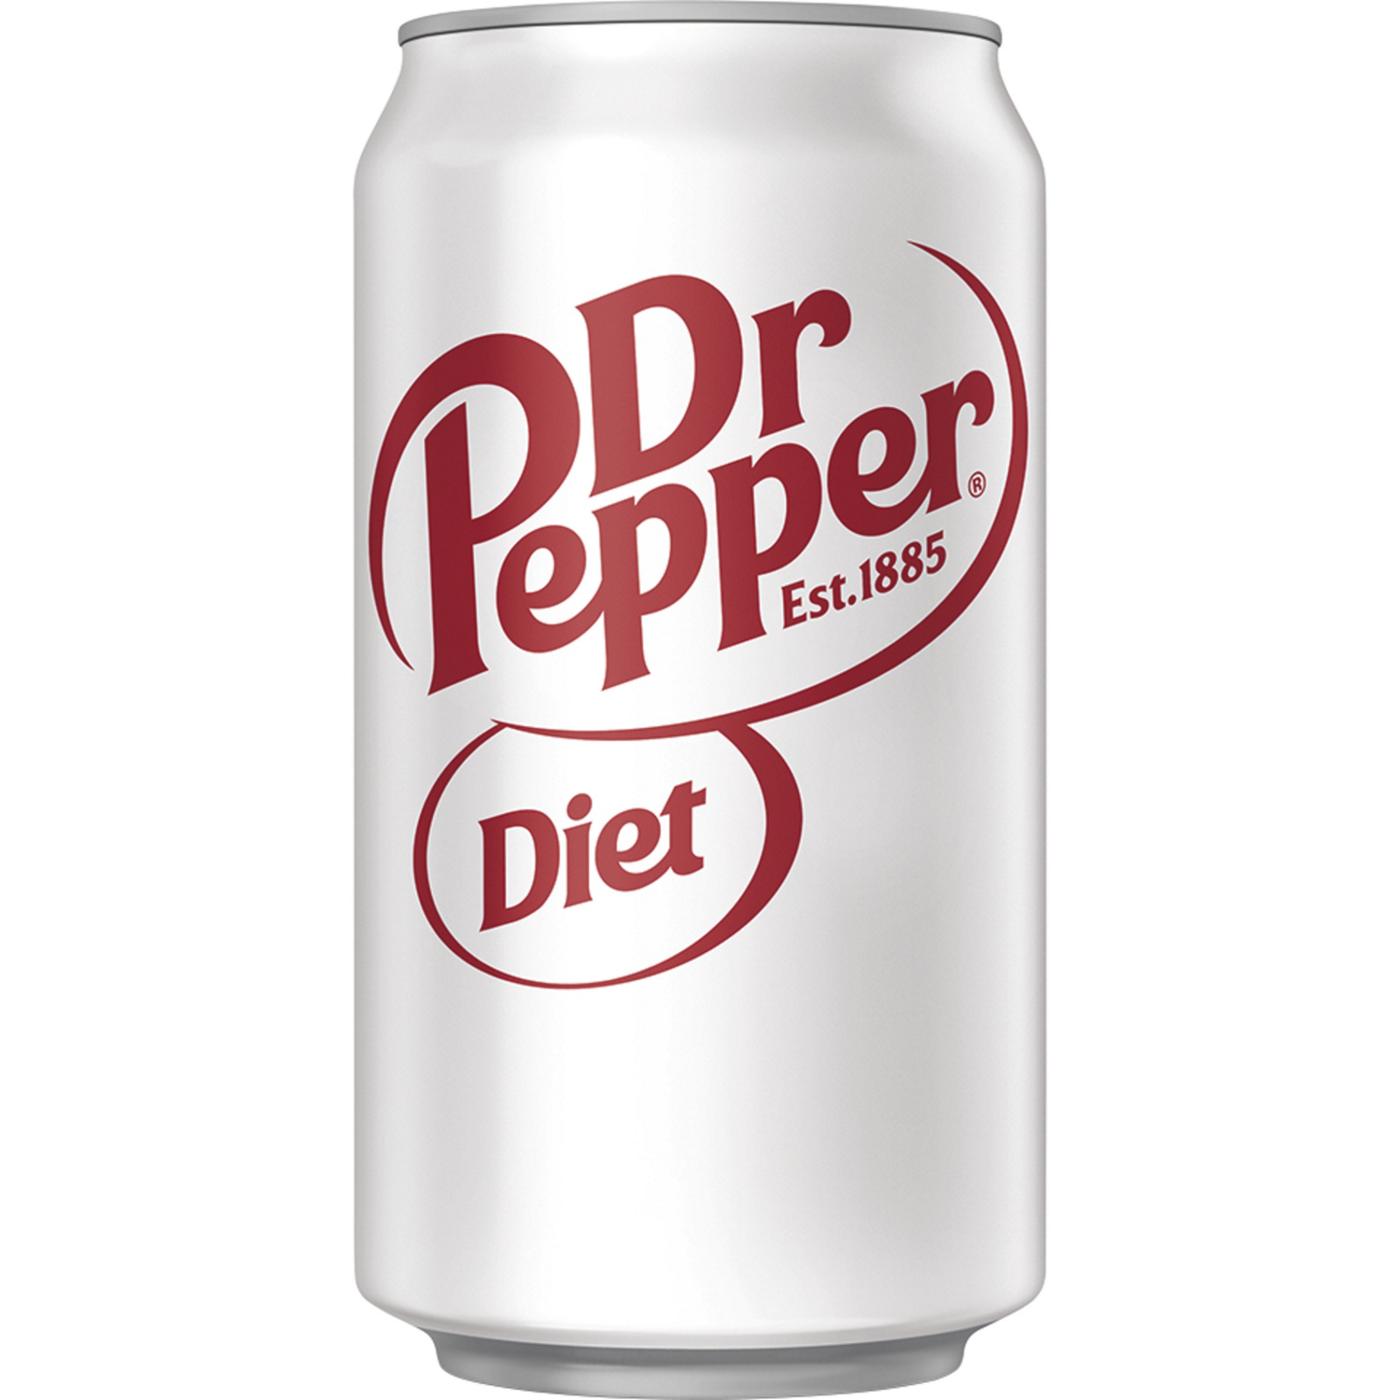 Dr Pepper Diet Soda 12 oz Cans; image 7 of 8